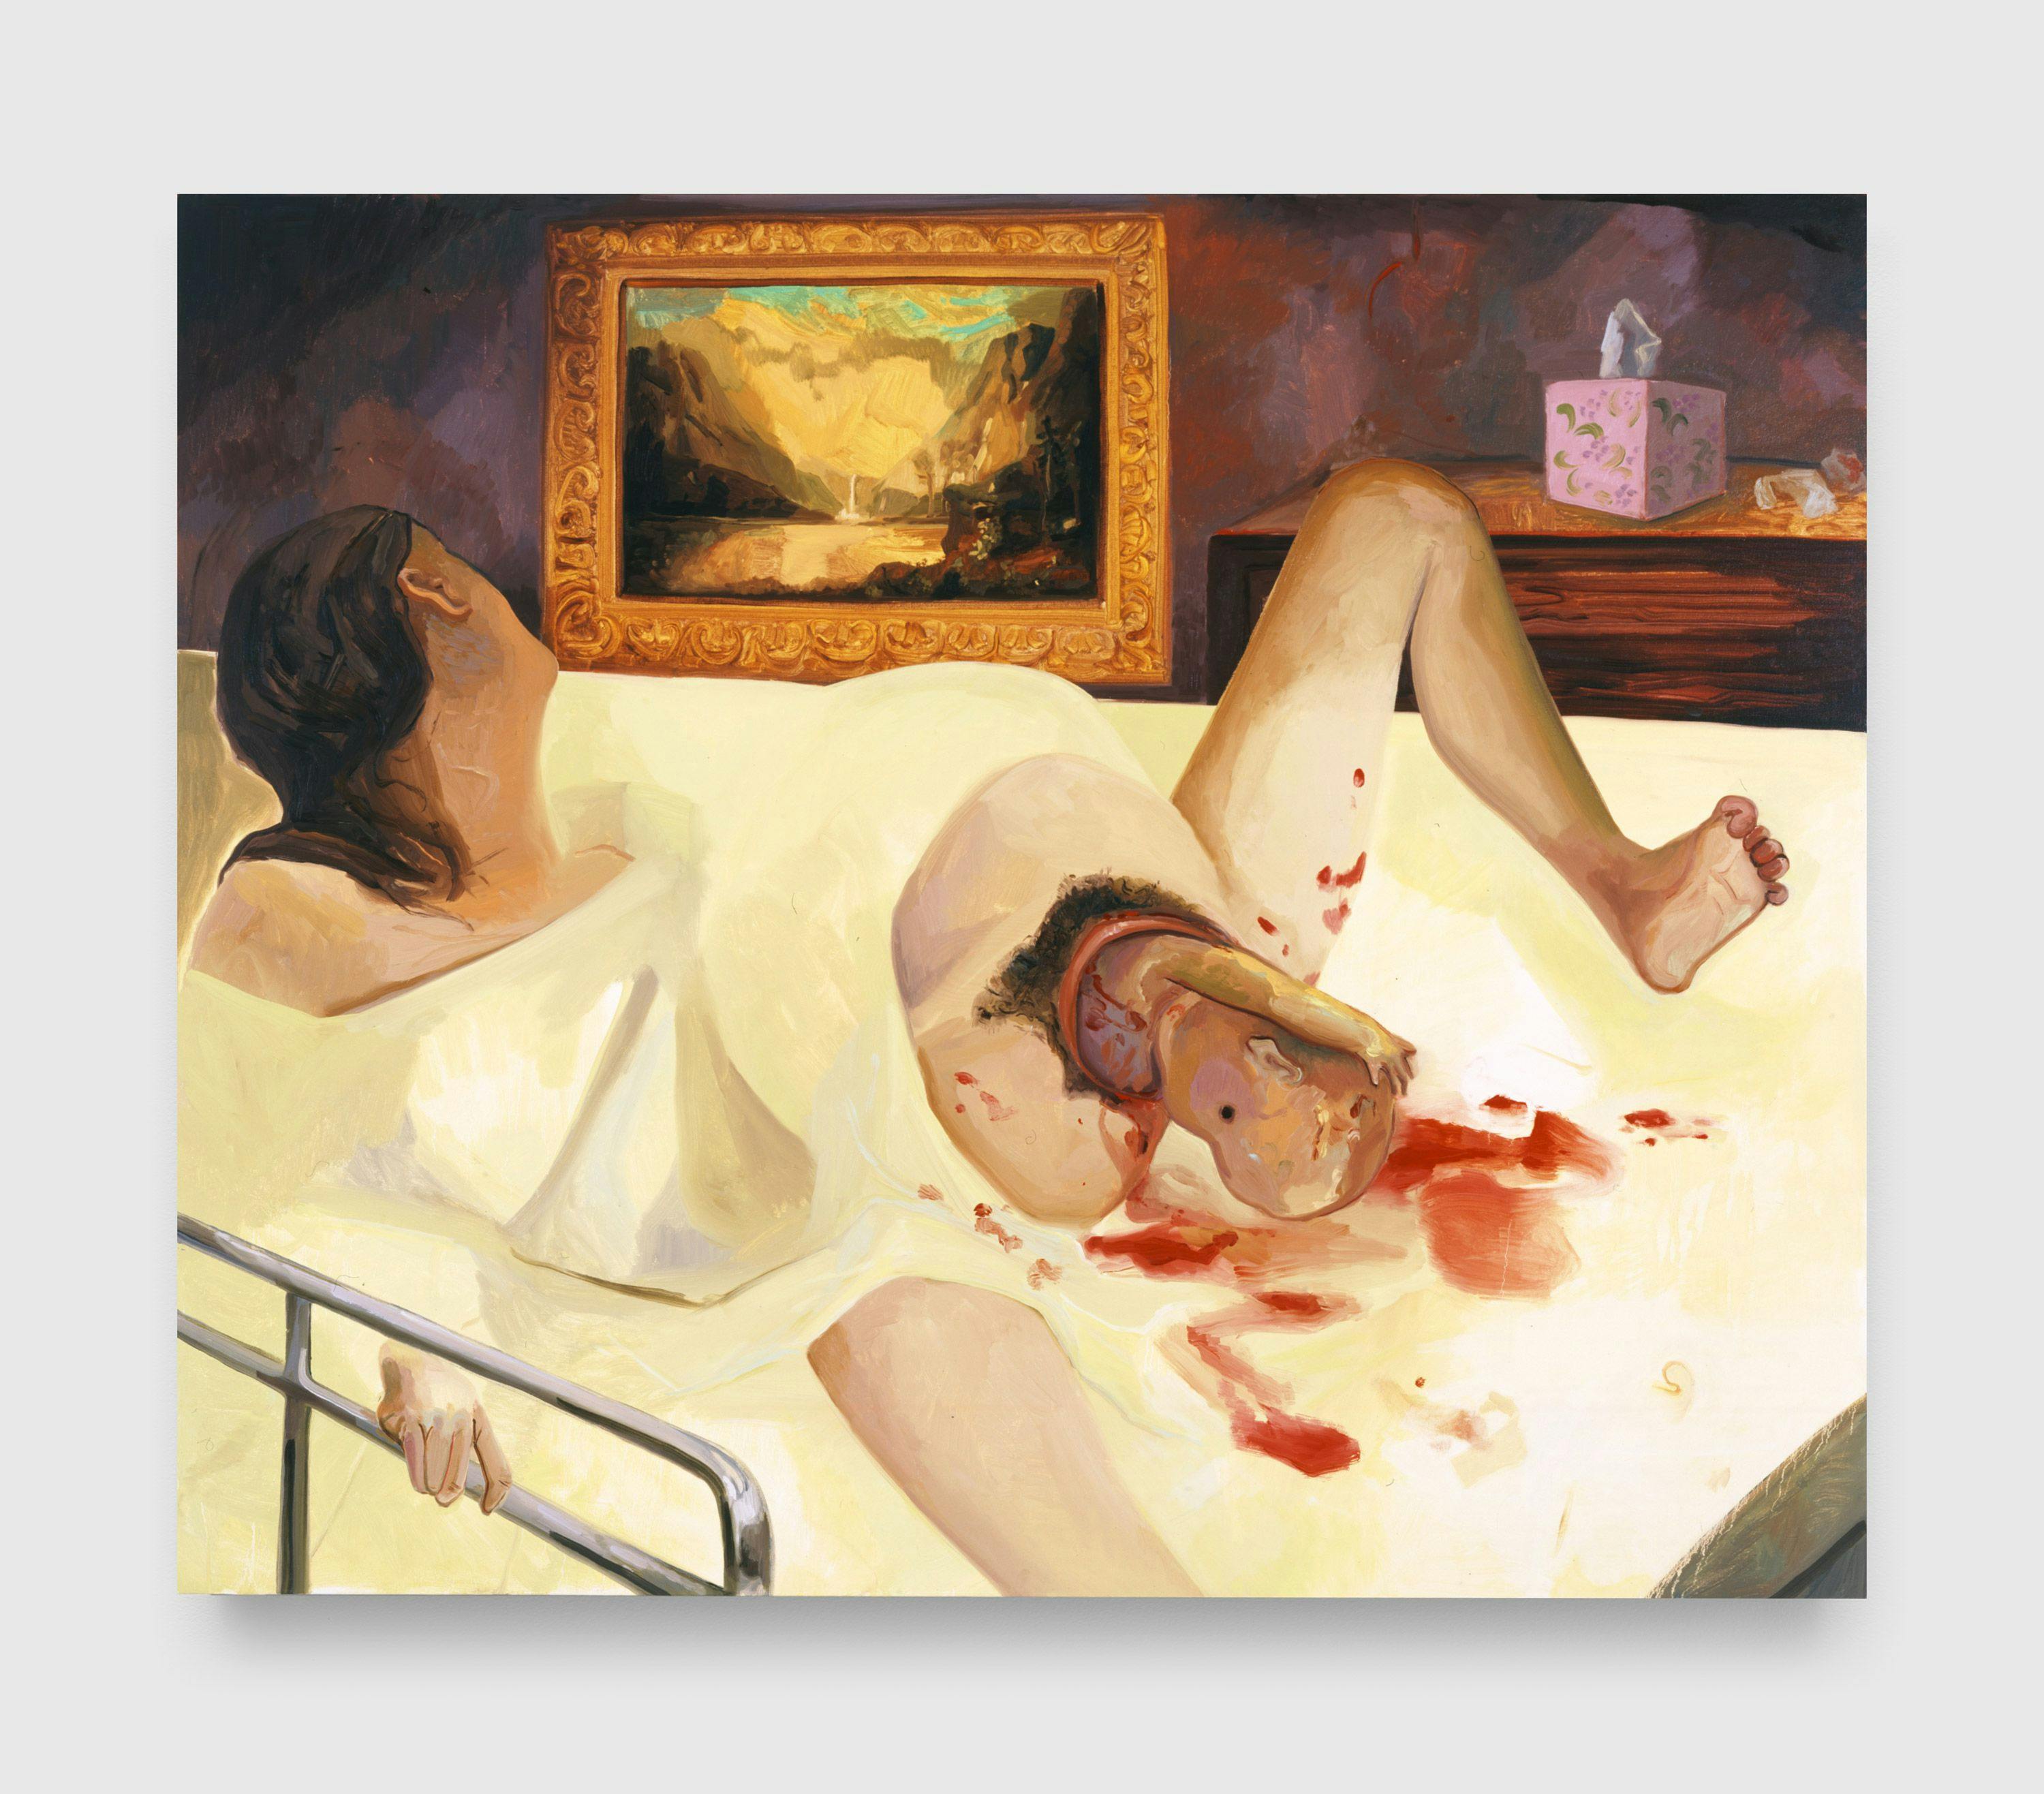 A painting by Dana Schutz, titled How We Would Give Birth, dated 2007.